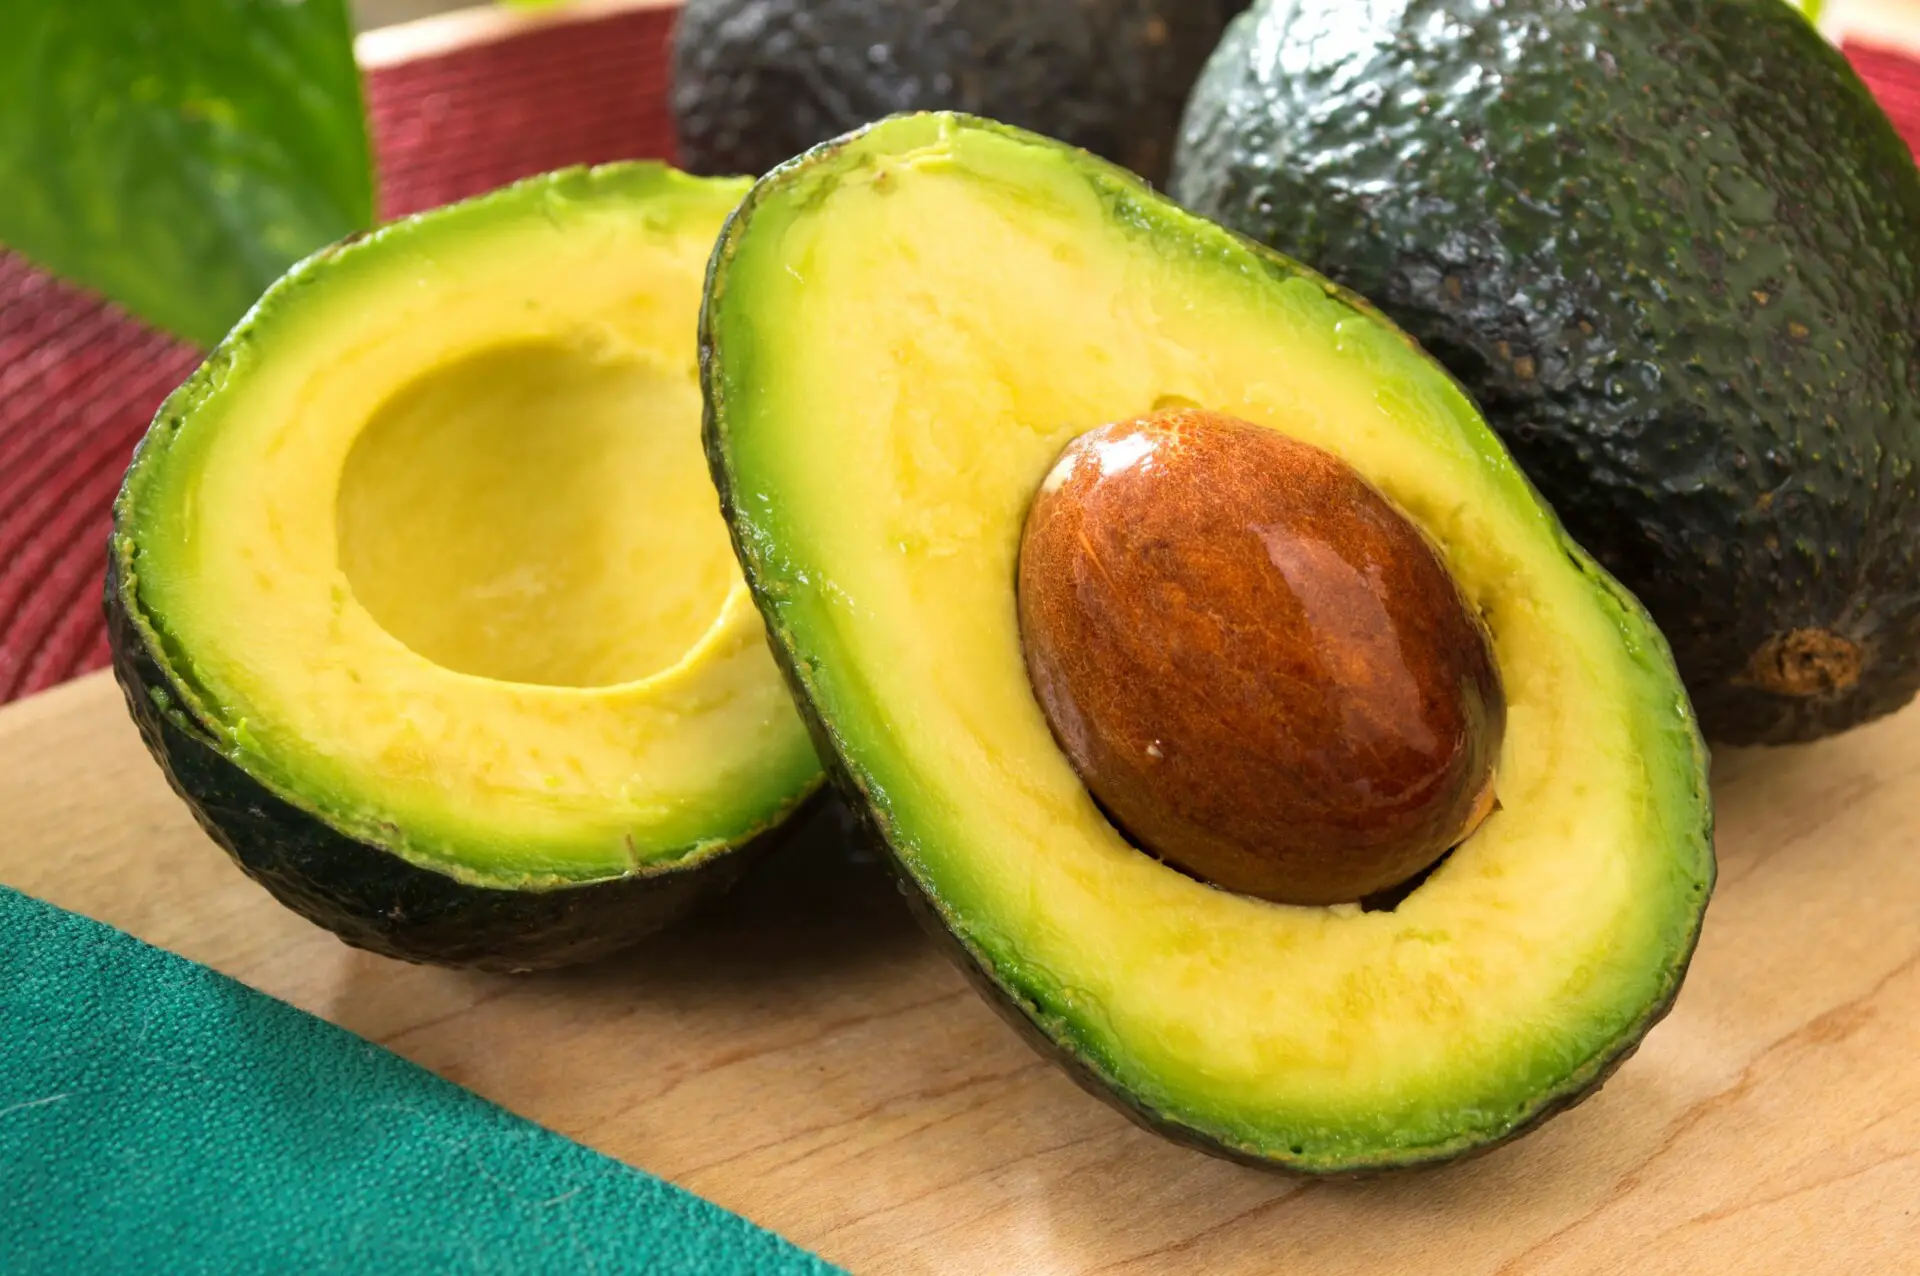 Are Avocados Bad for the Environment